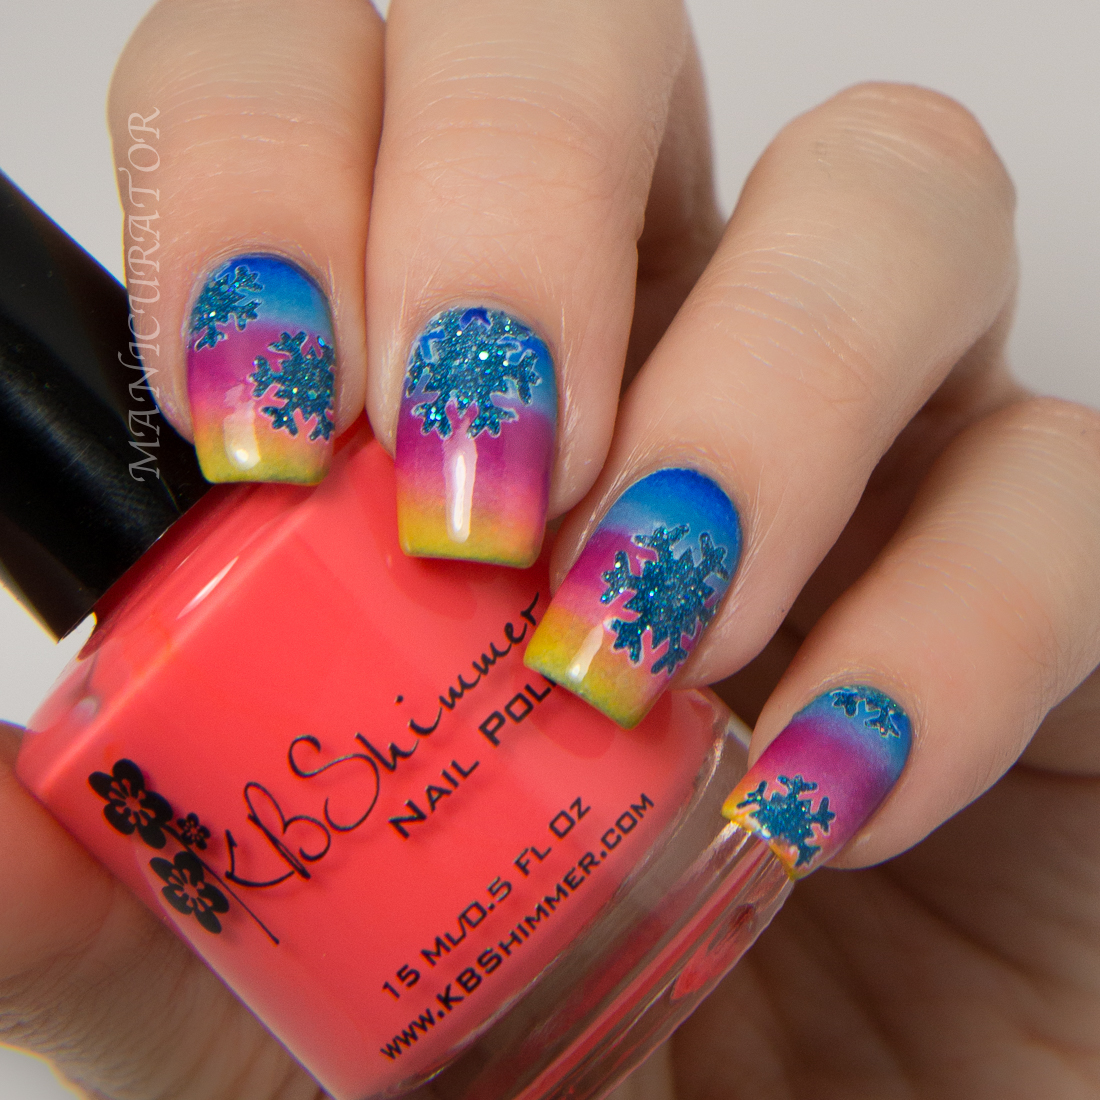 Live Love Polish UNT Lost In Paradise Snowflake Winter Sunset Nail Art